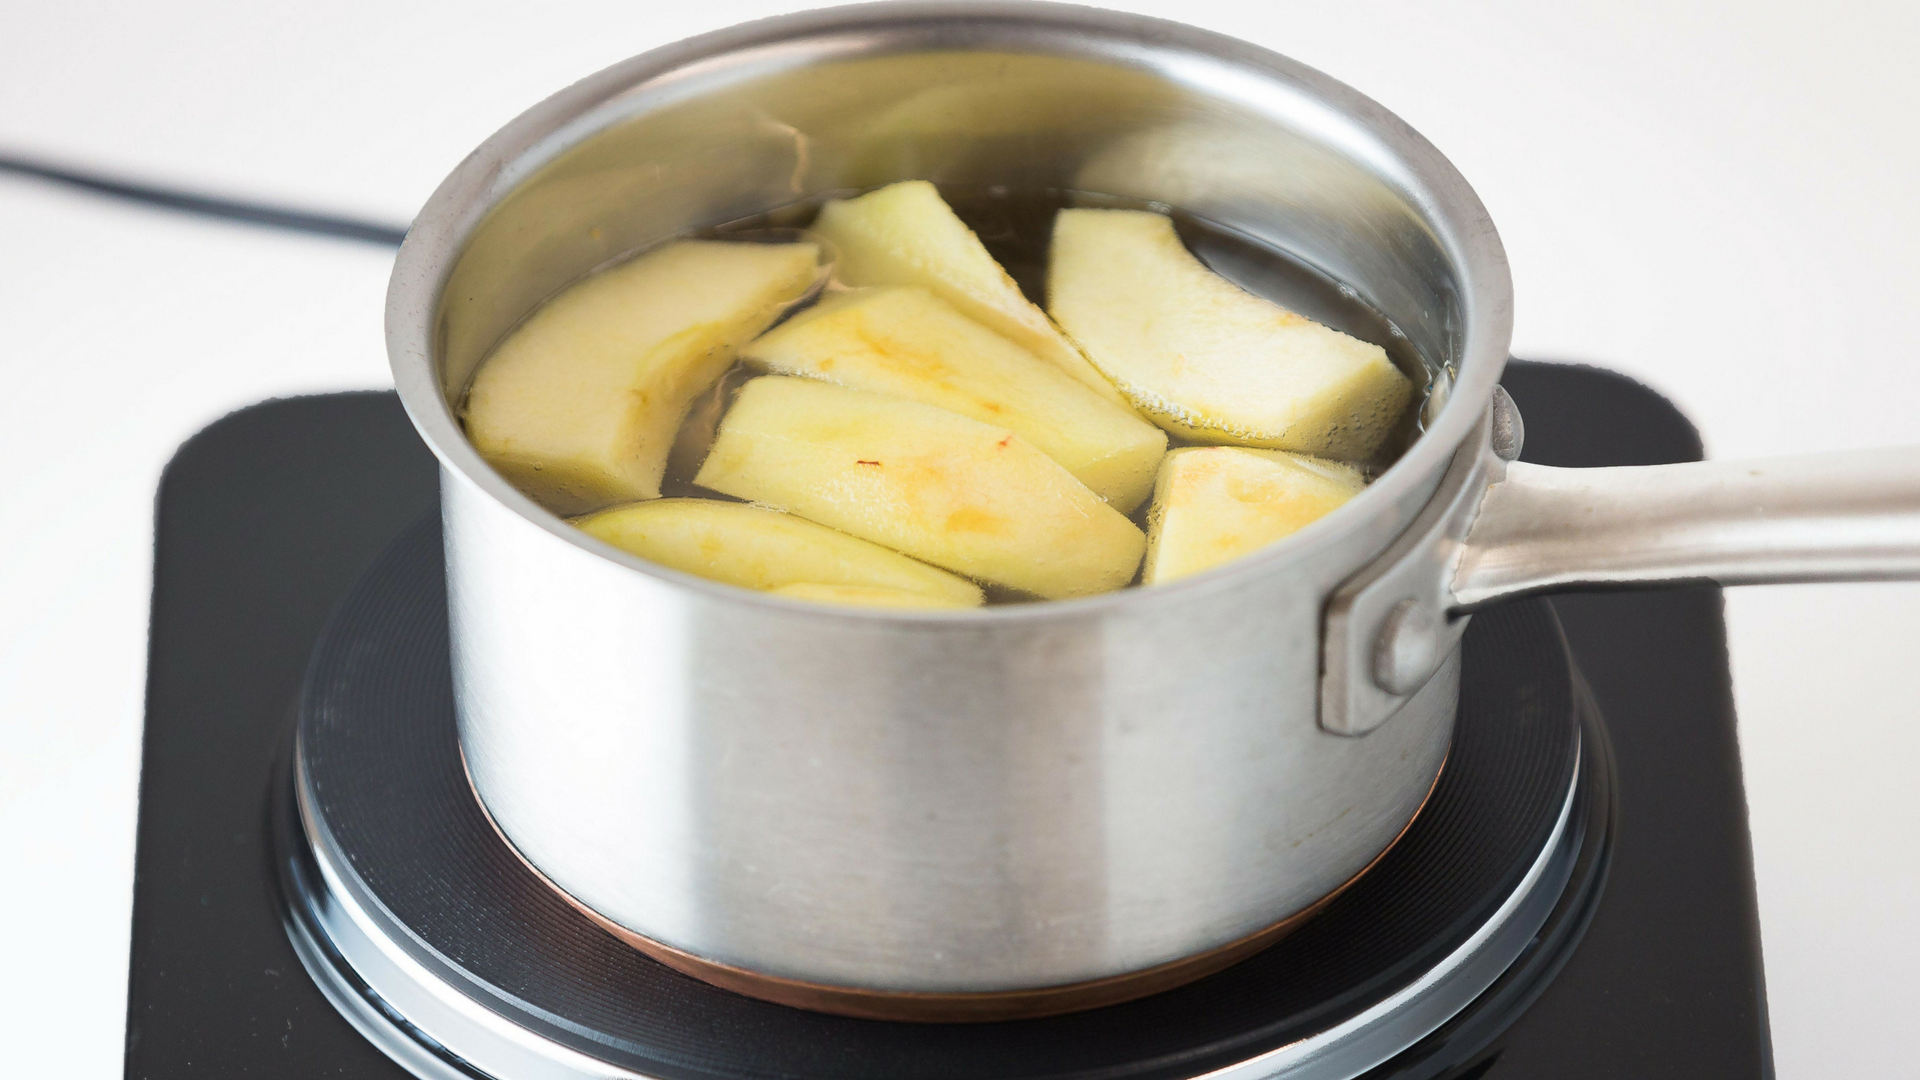 Boiling apple slices on hot plate